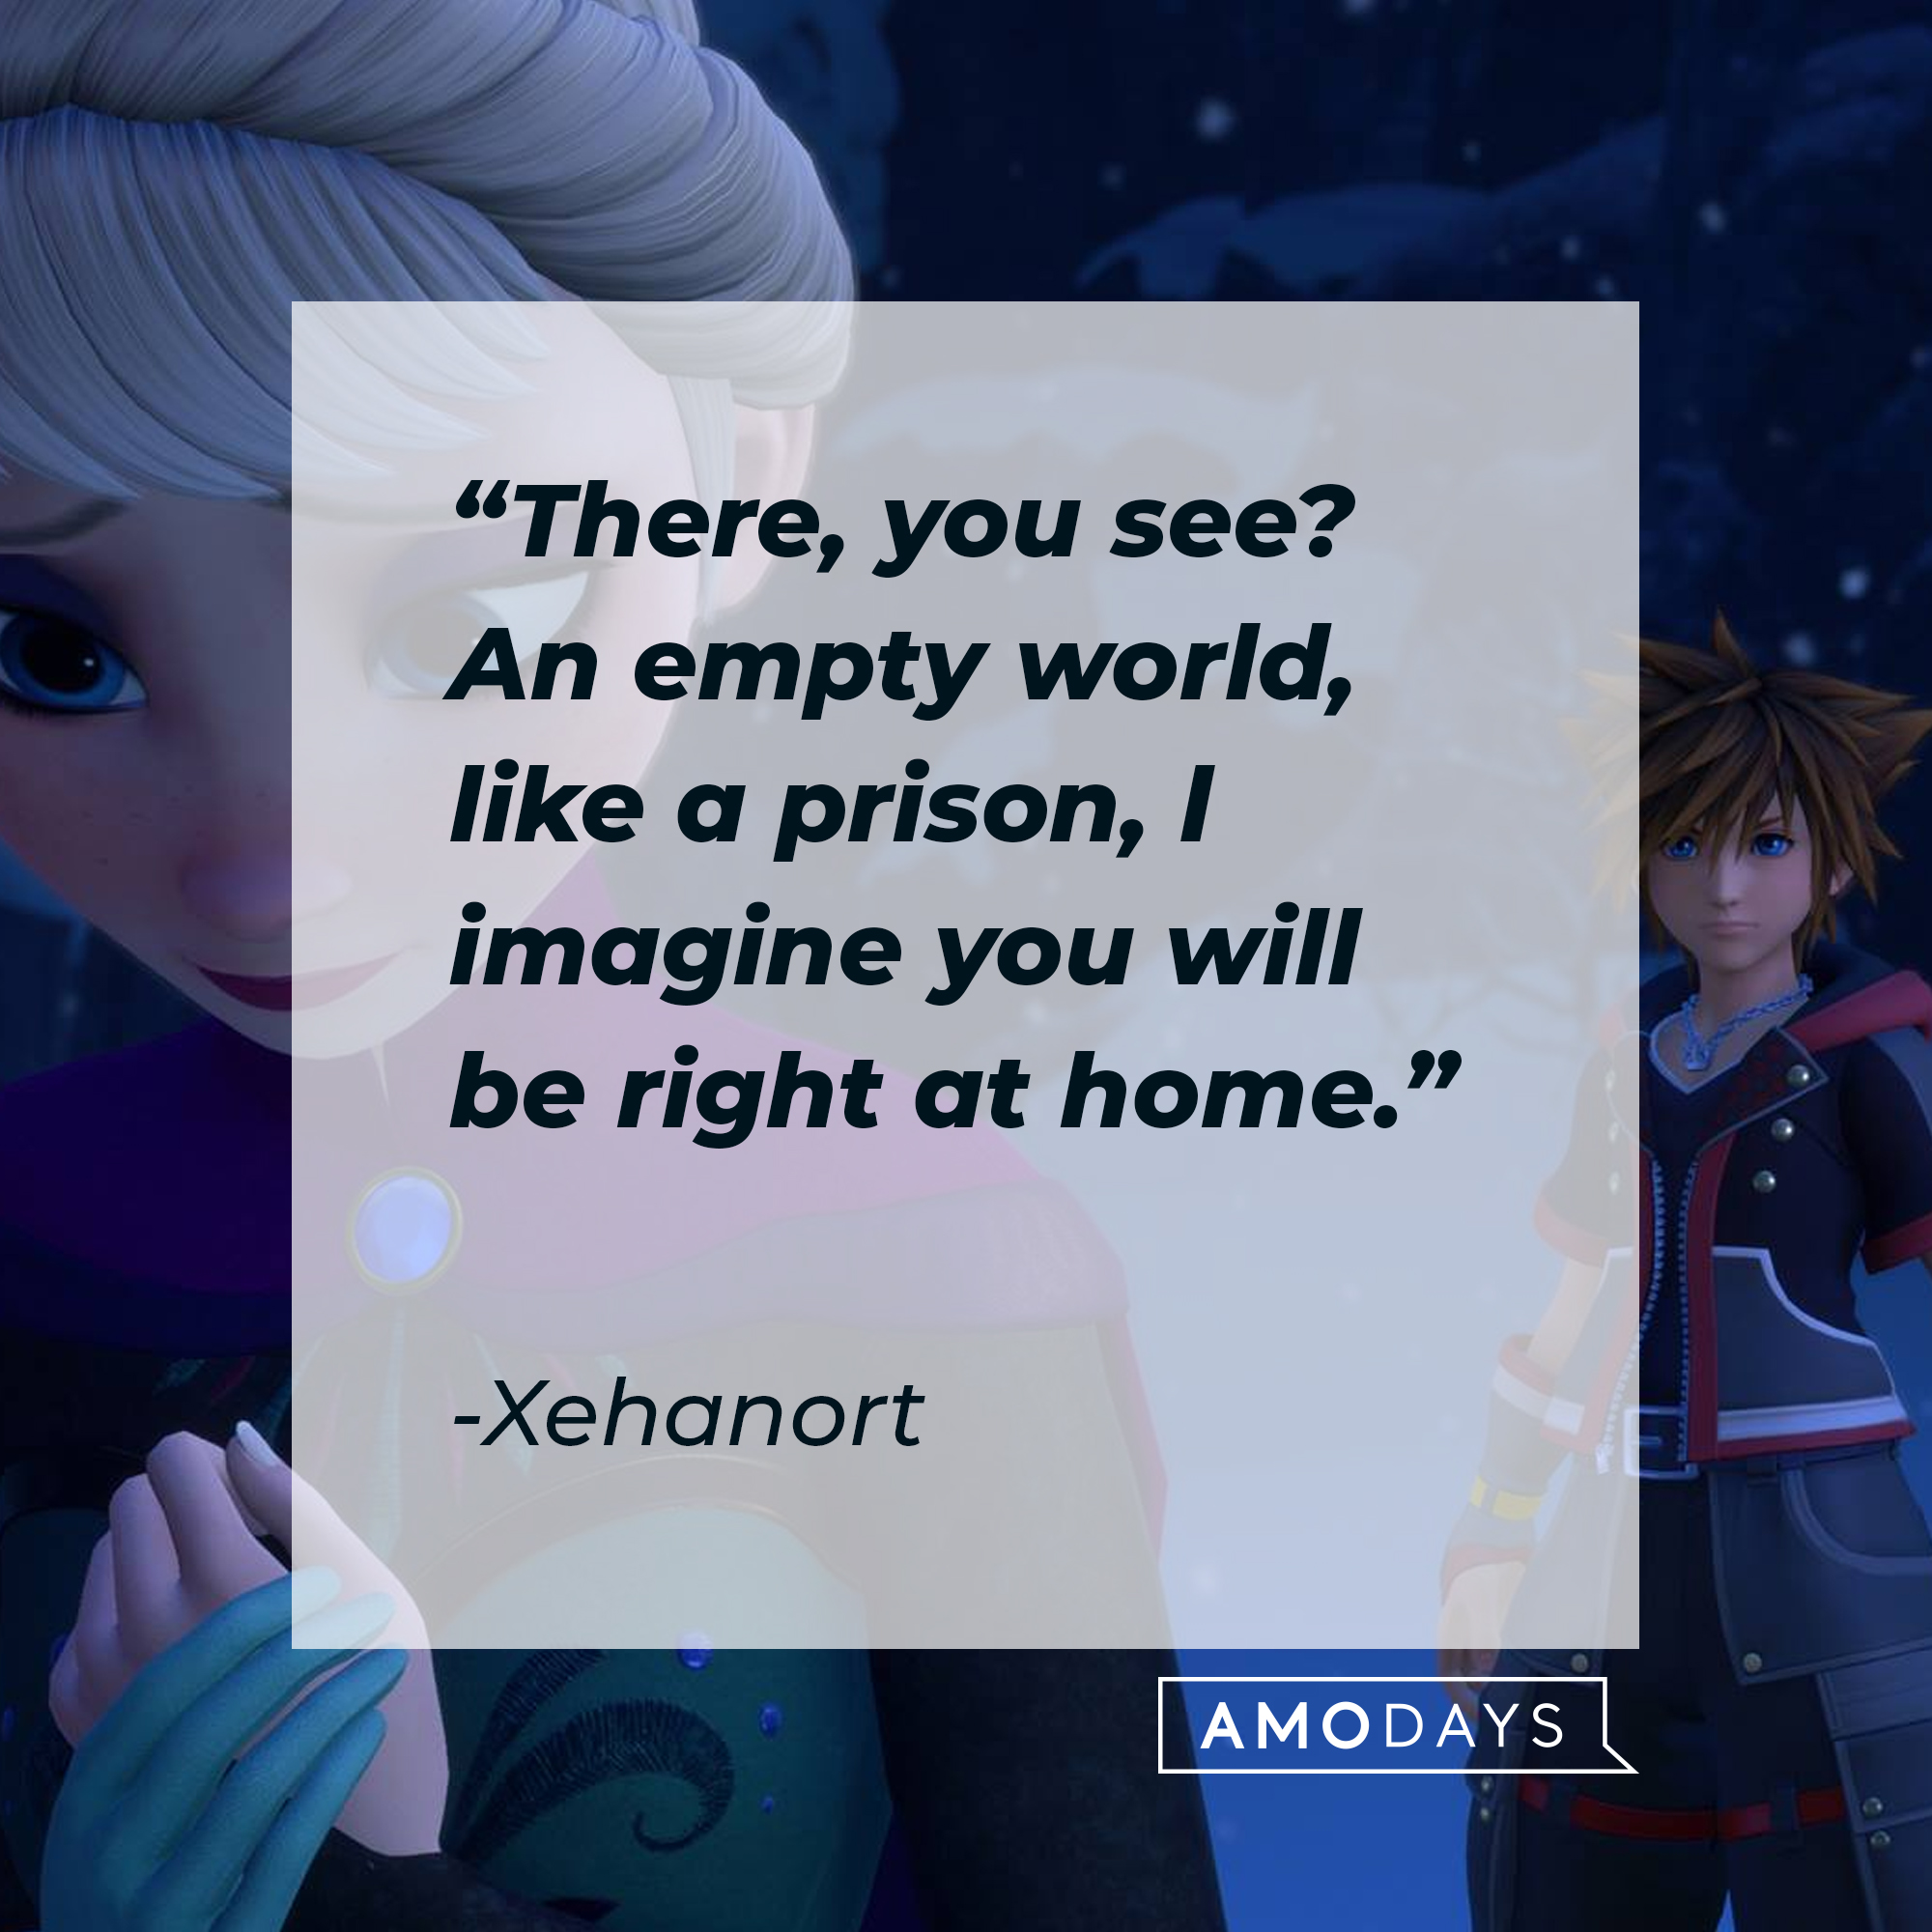 An image of Elsa and  Sora with Xehanort’s quote: “There, you see? An empty world, like a prison, l imagine you will be right at home.” | Source: facebook.com/KingdomHearts